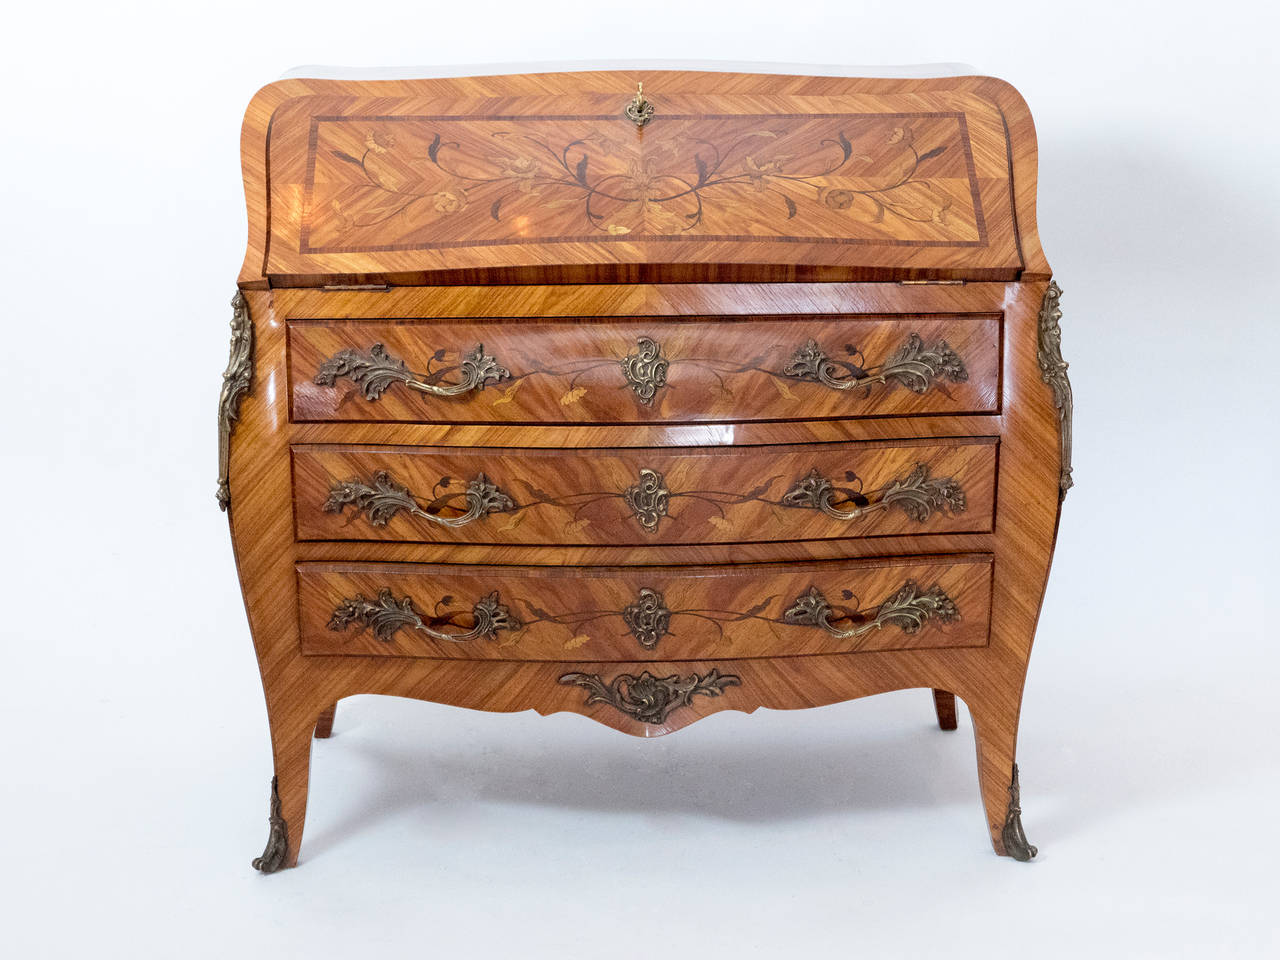 An incredible 19th century Louis XV style secretary with ornate marquetry with a floral design and bronze ormolu. The working lock conceals the leather topped work area.  This very elegant piece is in perfect condition for it age.